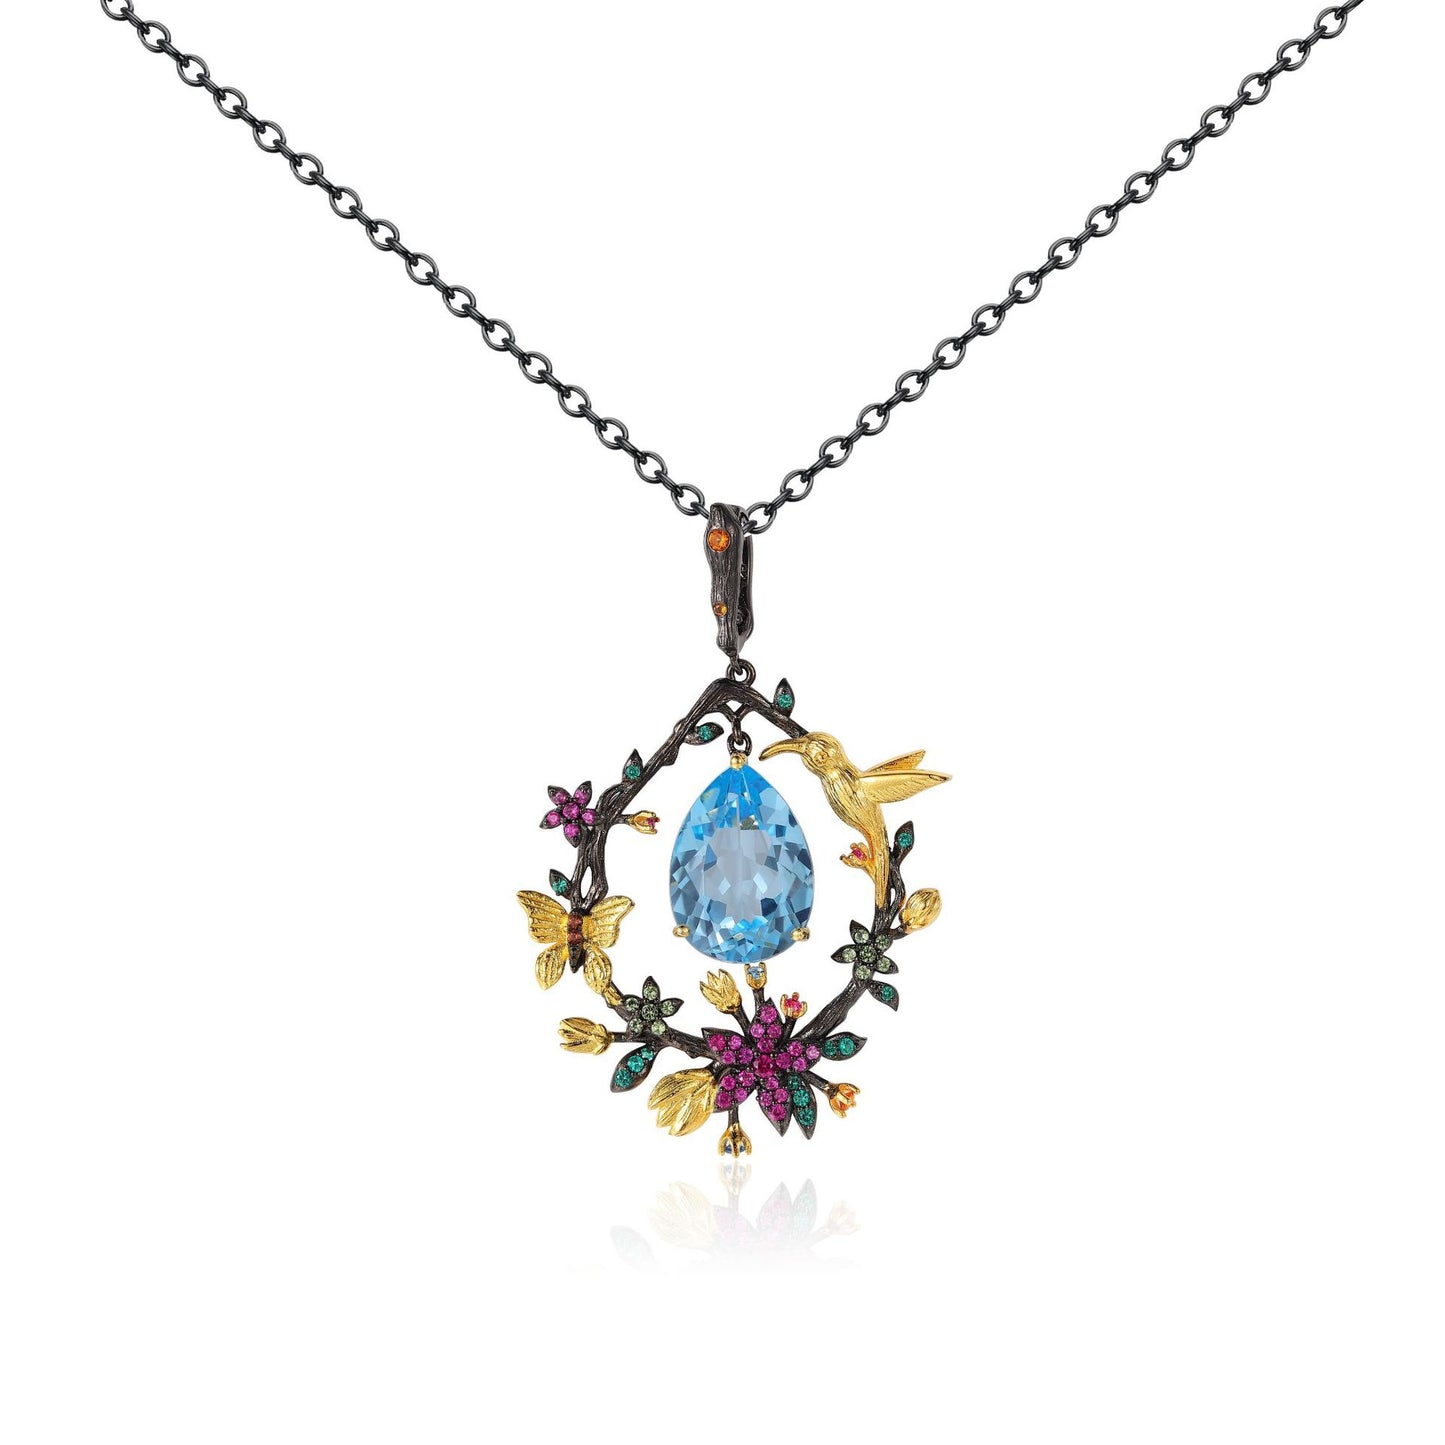 Natural Colorful Gemstone Spring on The Branch with Bird Pendant Silver Necklace for Women